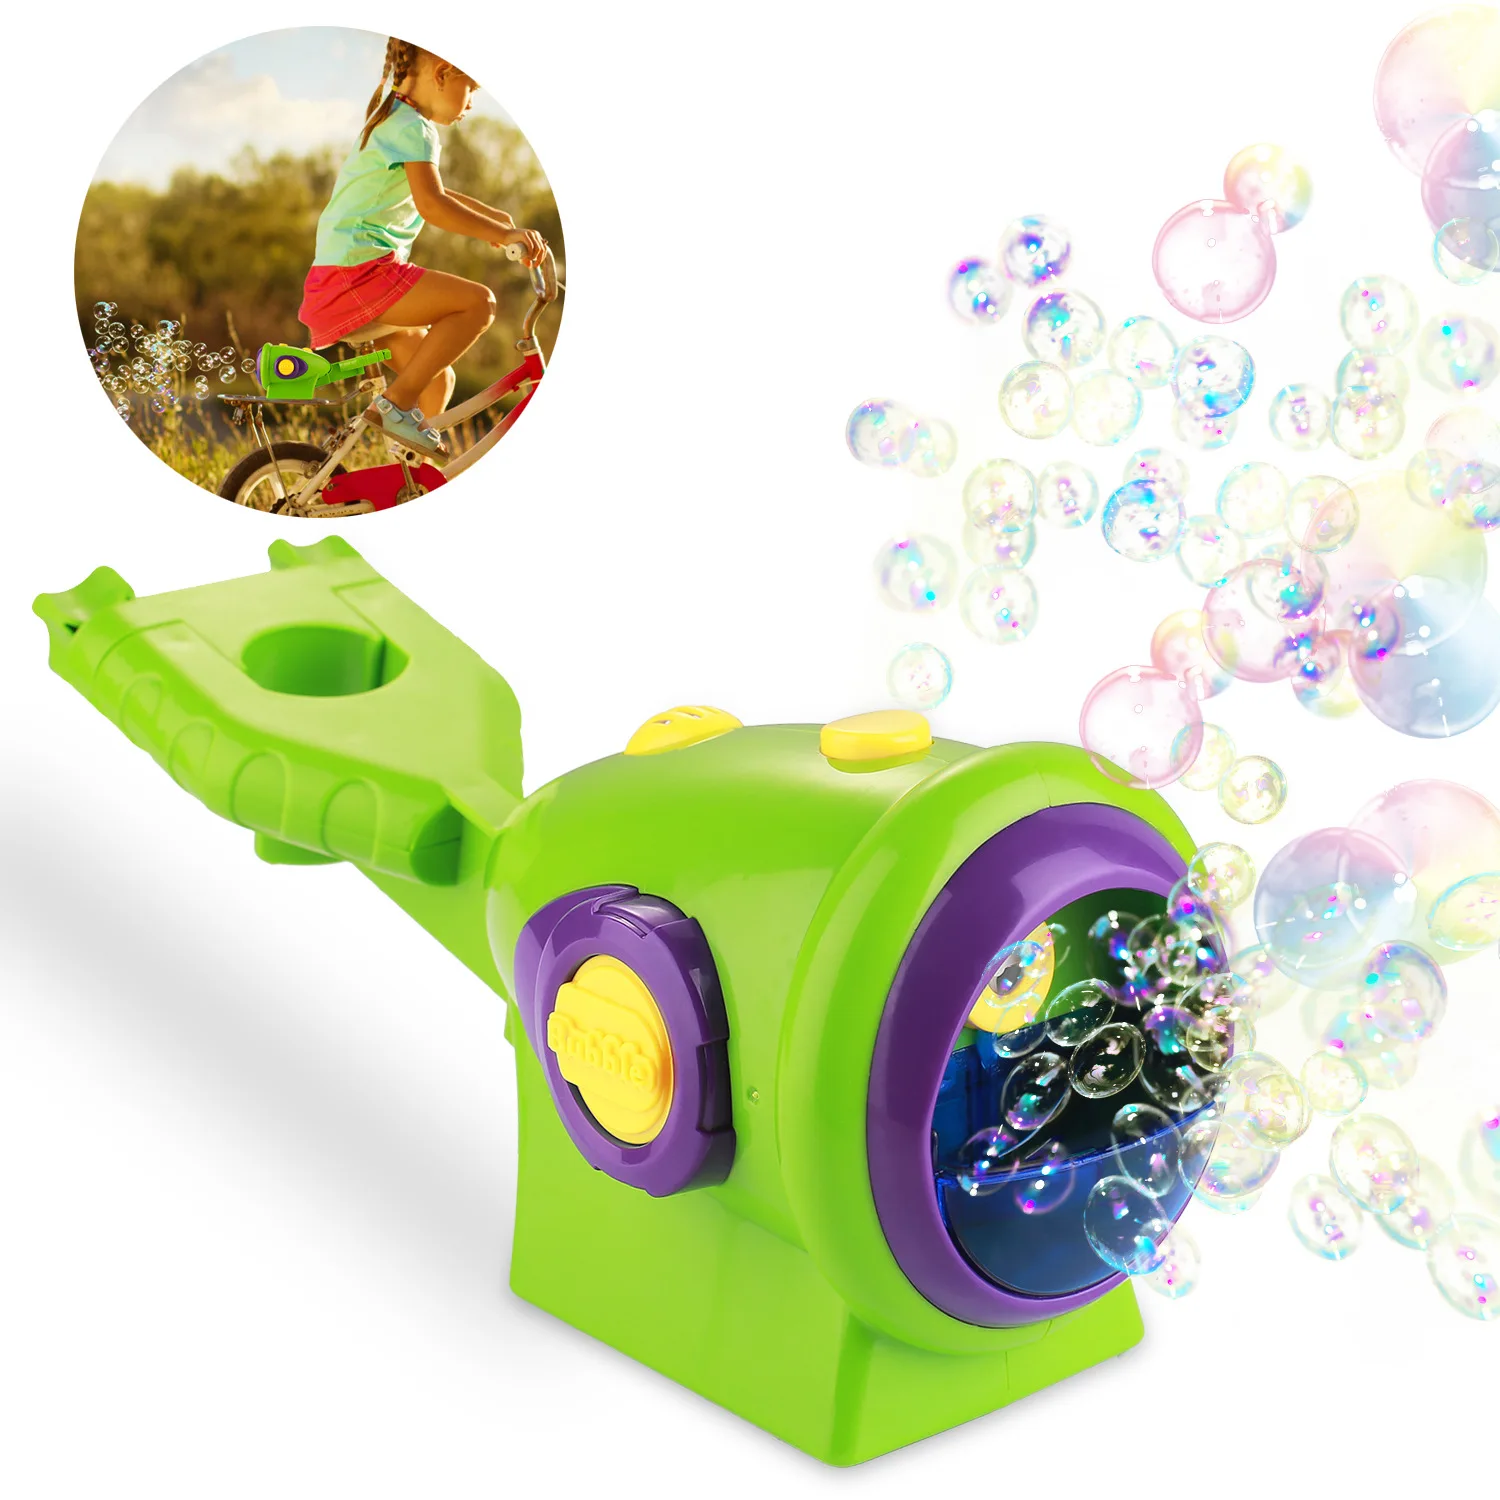 Outdoor Bike Bubble Blower Toy Soap Water Bubble Gun Machine Cartoon Water Gun Gift For Kids Easy to Operate Automatic Blower